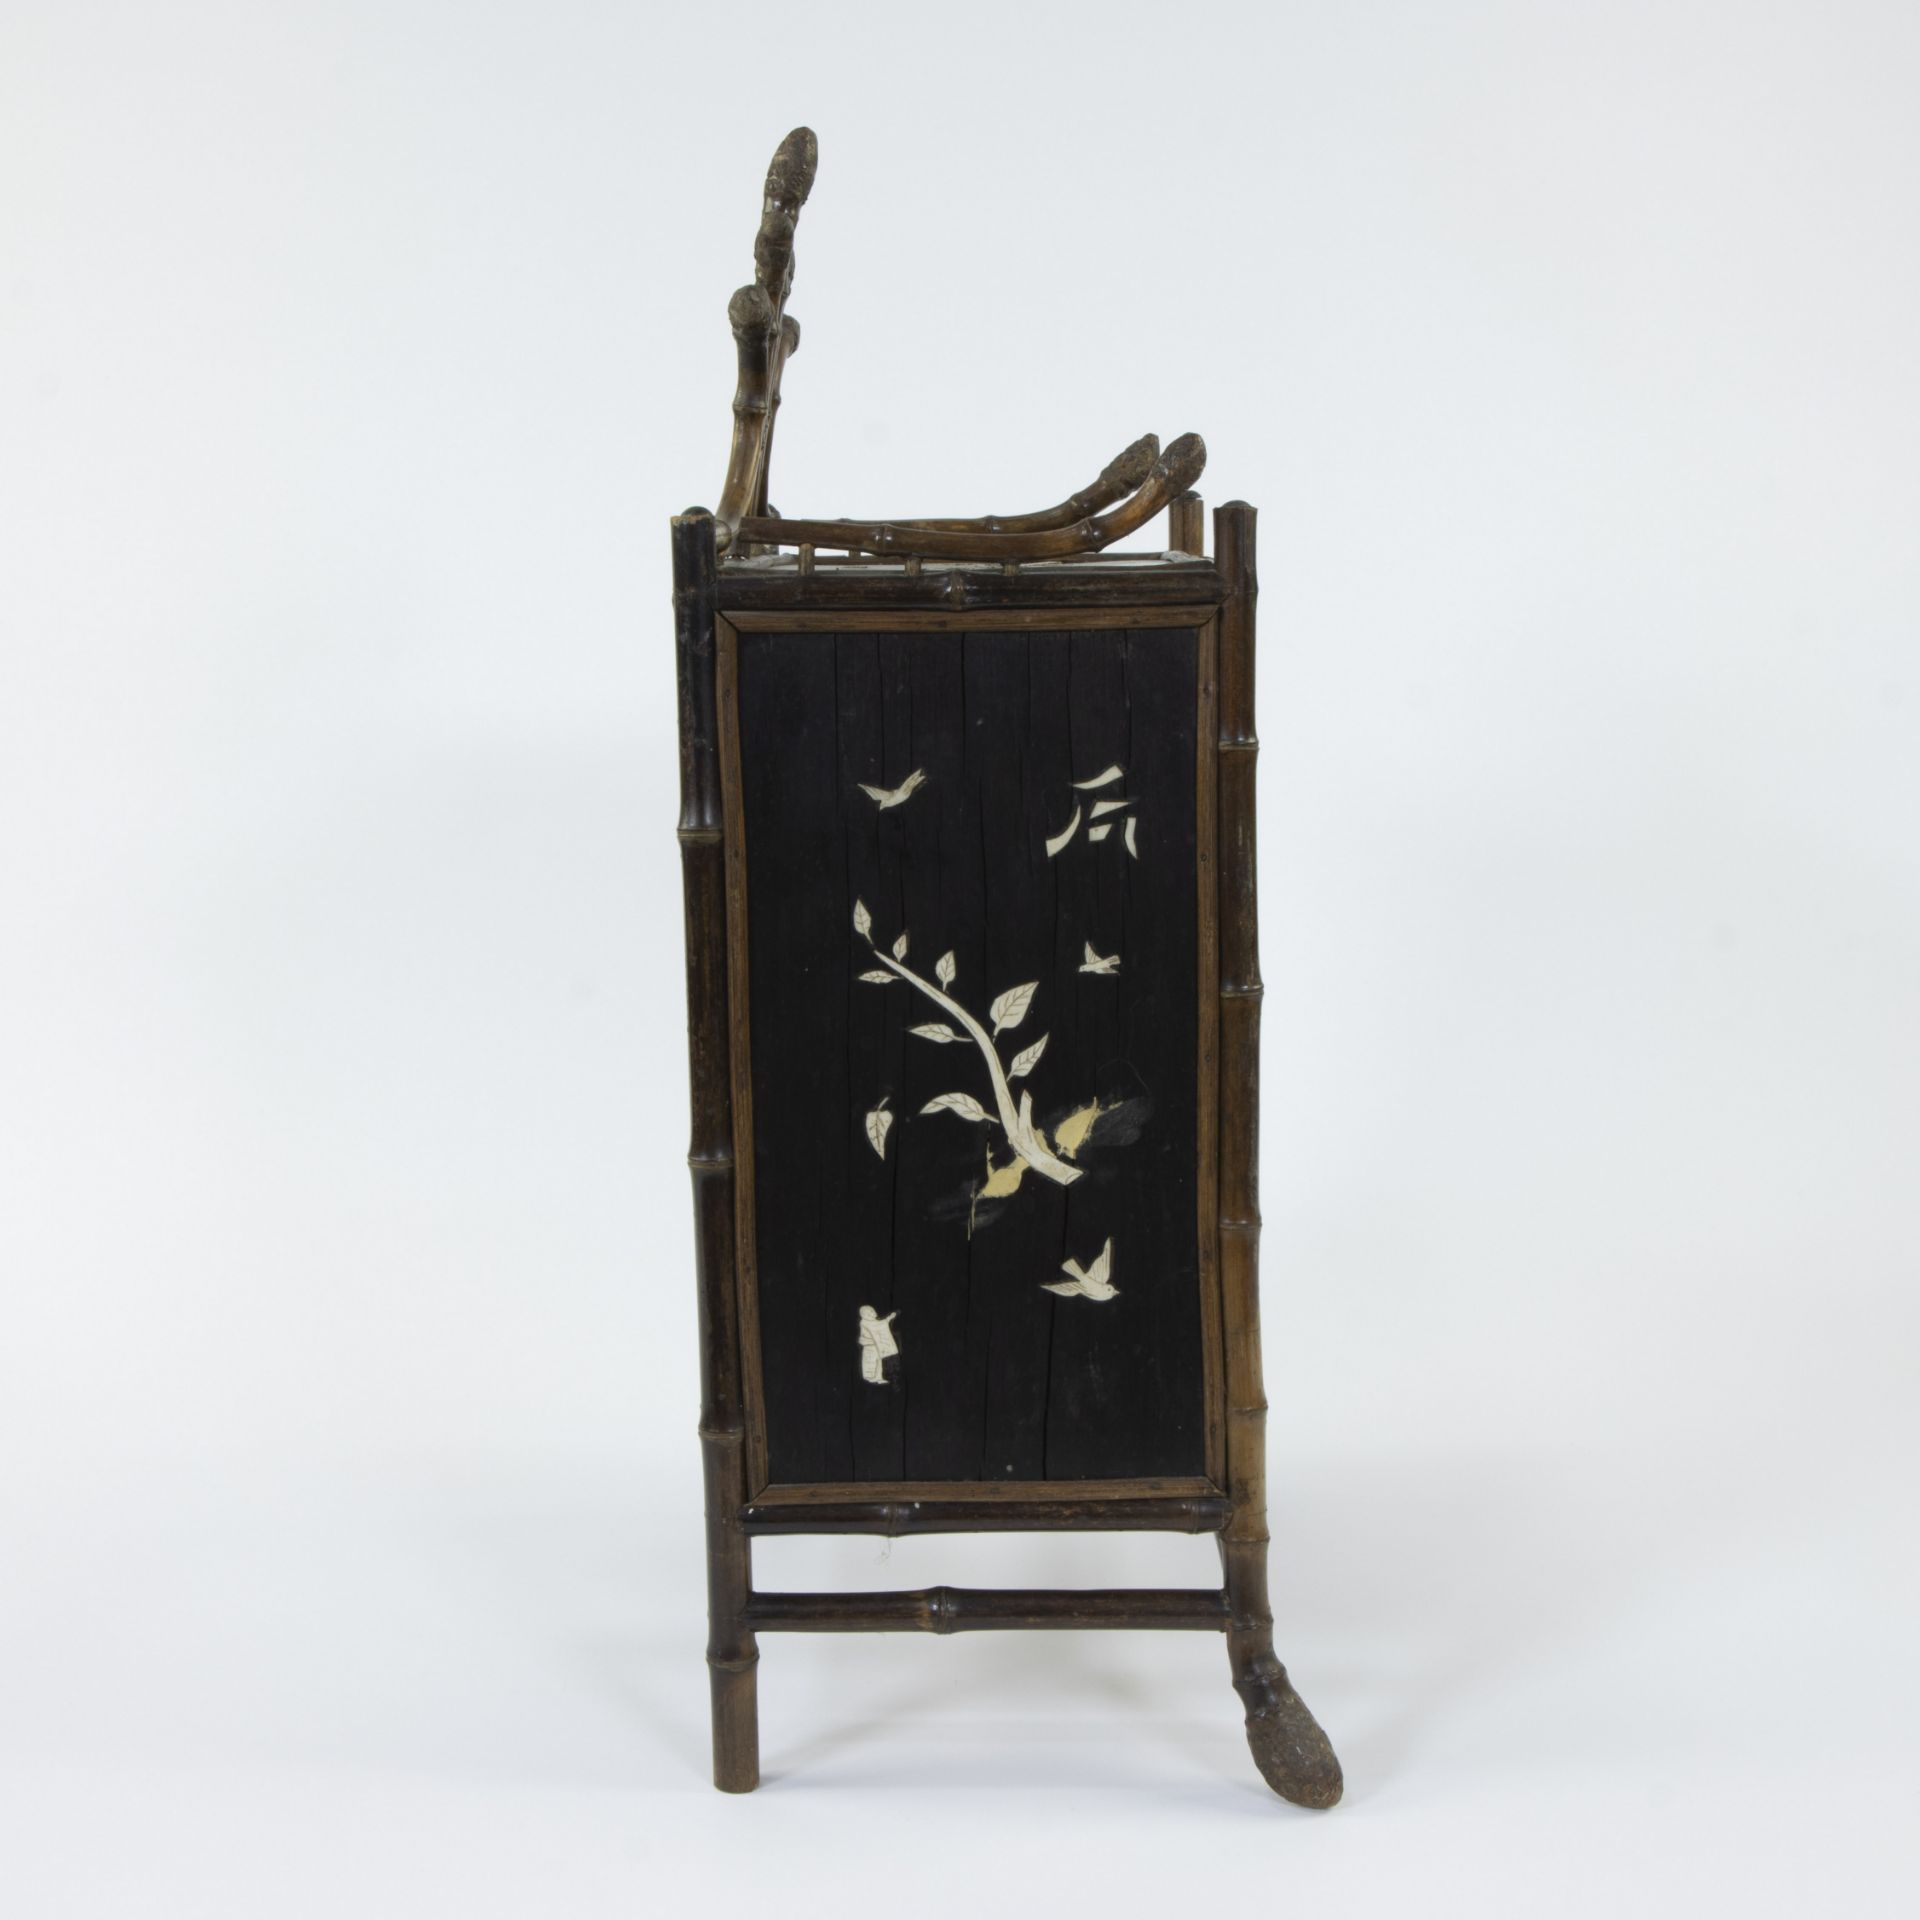 Asian bamboo cabinet with inlaid work of leaves, birds and figures in bone - Image 5 of 6